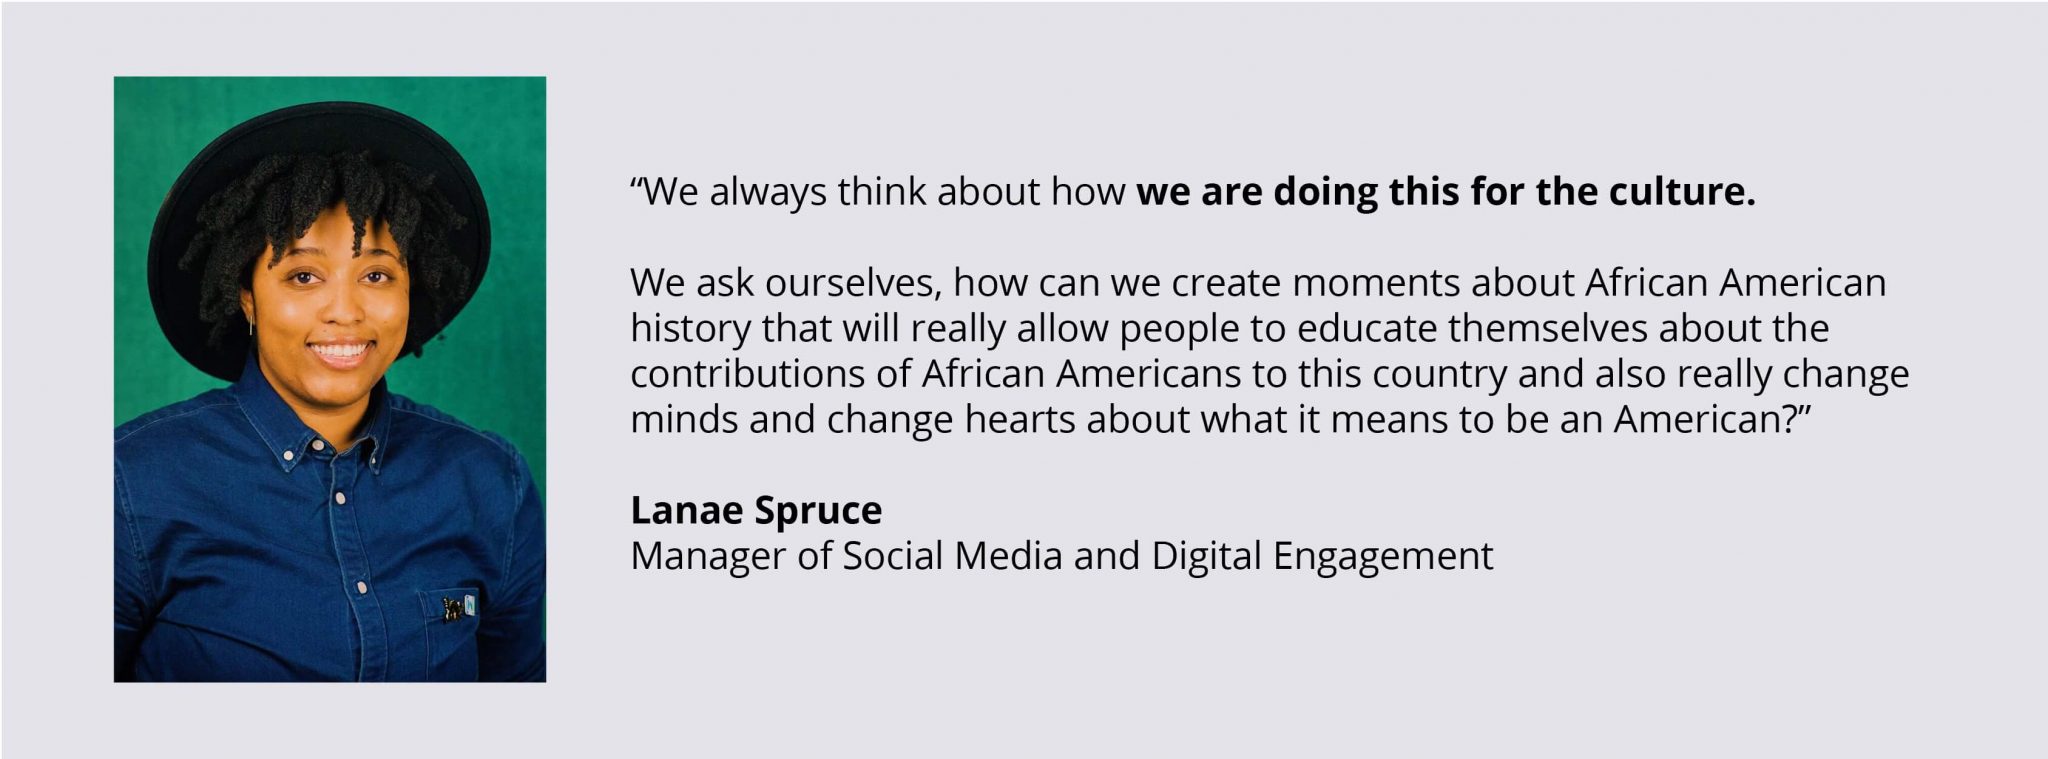 Quote Image: “We always think about how we are doing this for the culture. We ask ourselves, how can we create moments about African American history that will really allow people to educate themselves about the contributions of African Americans to this country and also really change minds and change hearts about what it means to be an American?”